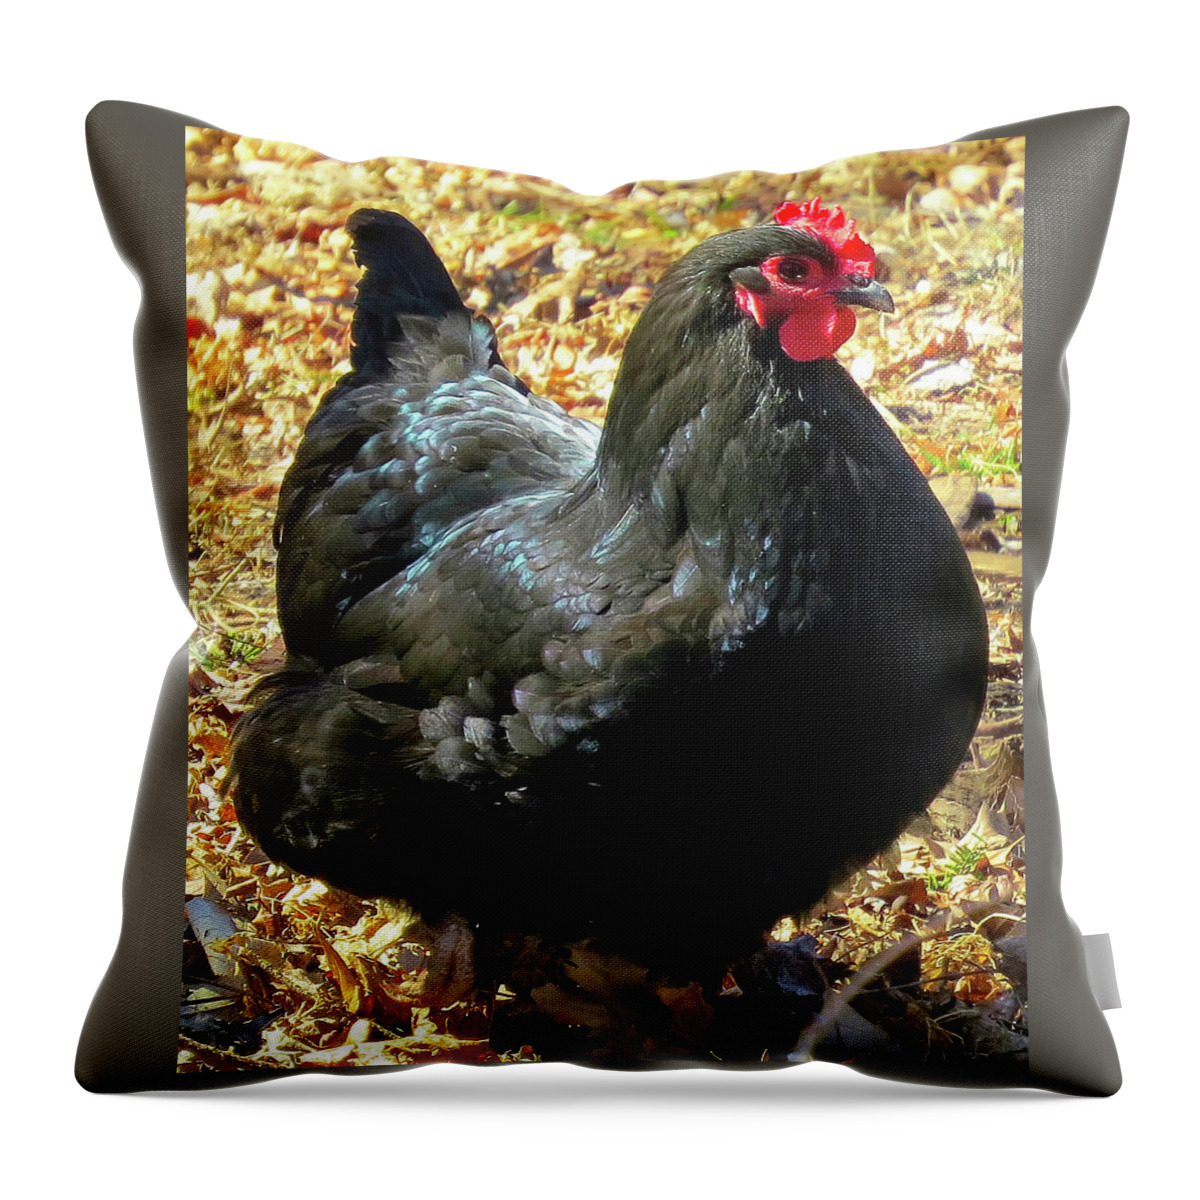 Black Chickens Throw Pillow featuring the photograph Black Jersey Giant by Linda Stern